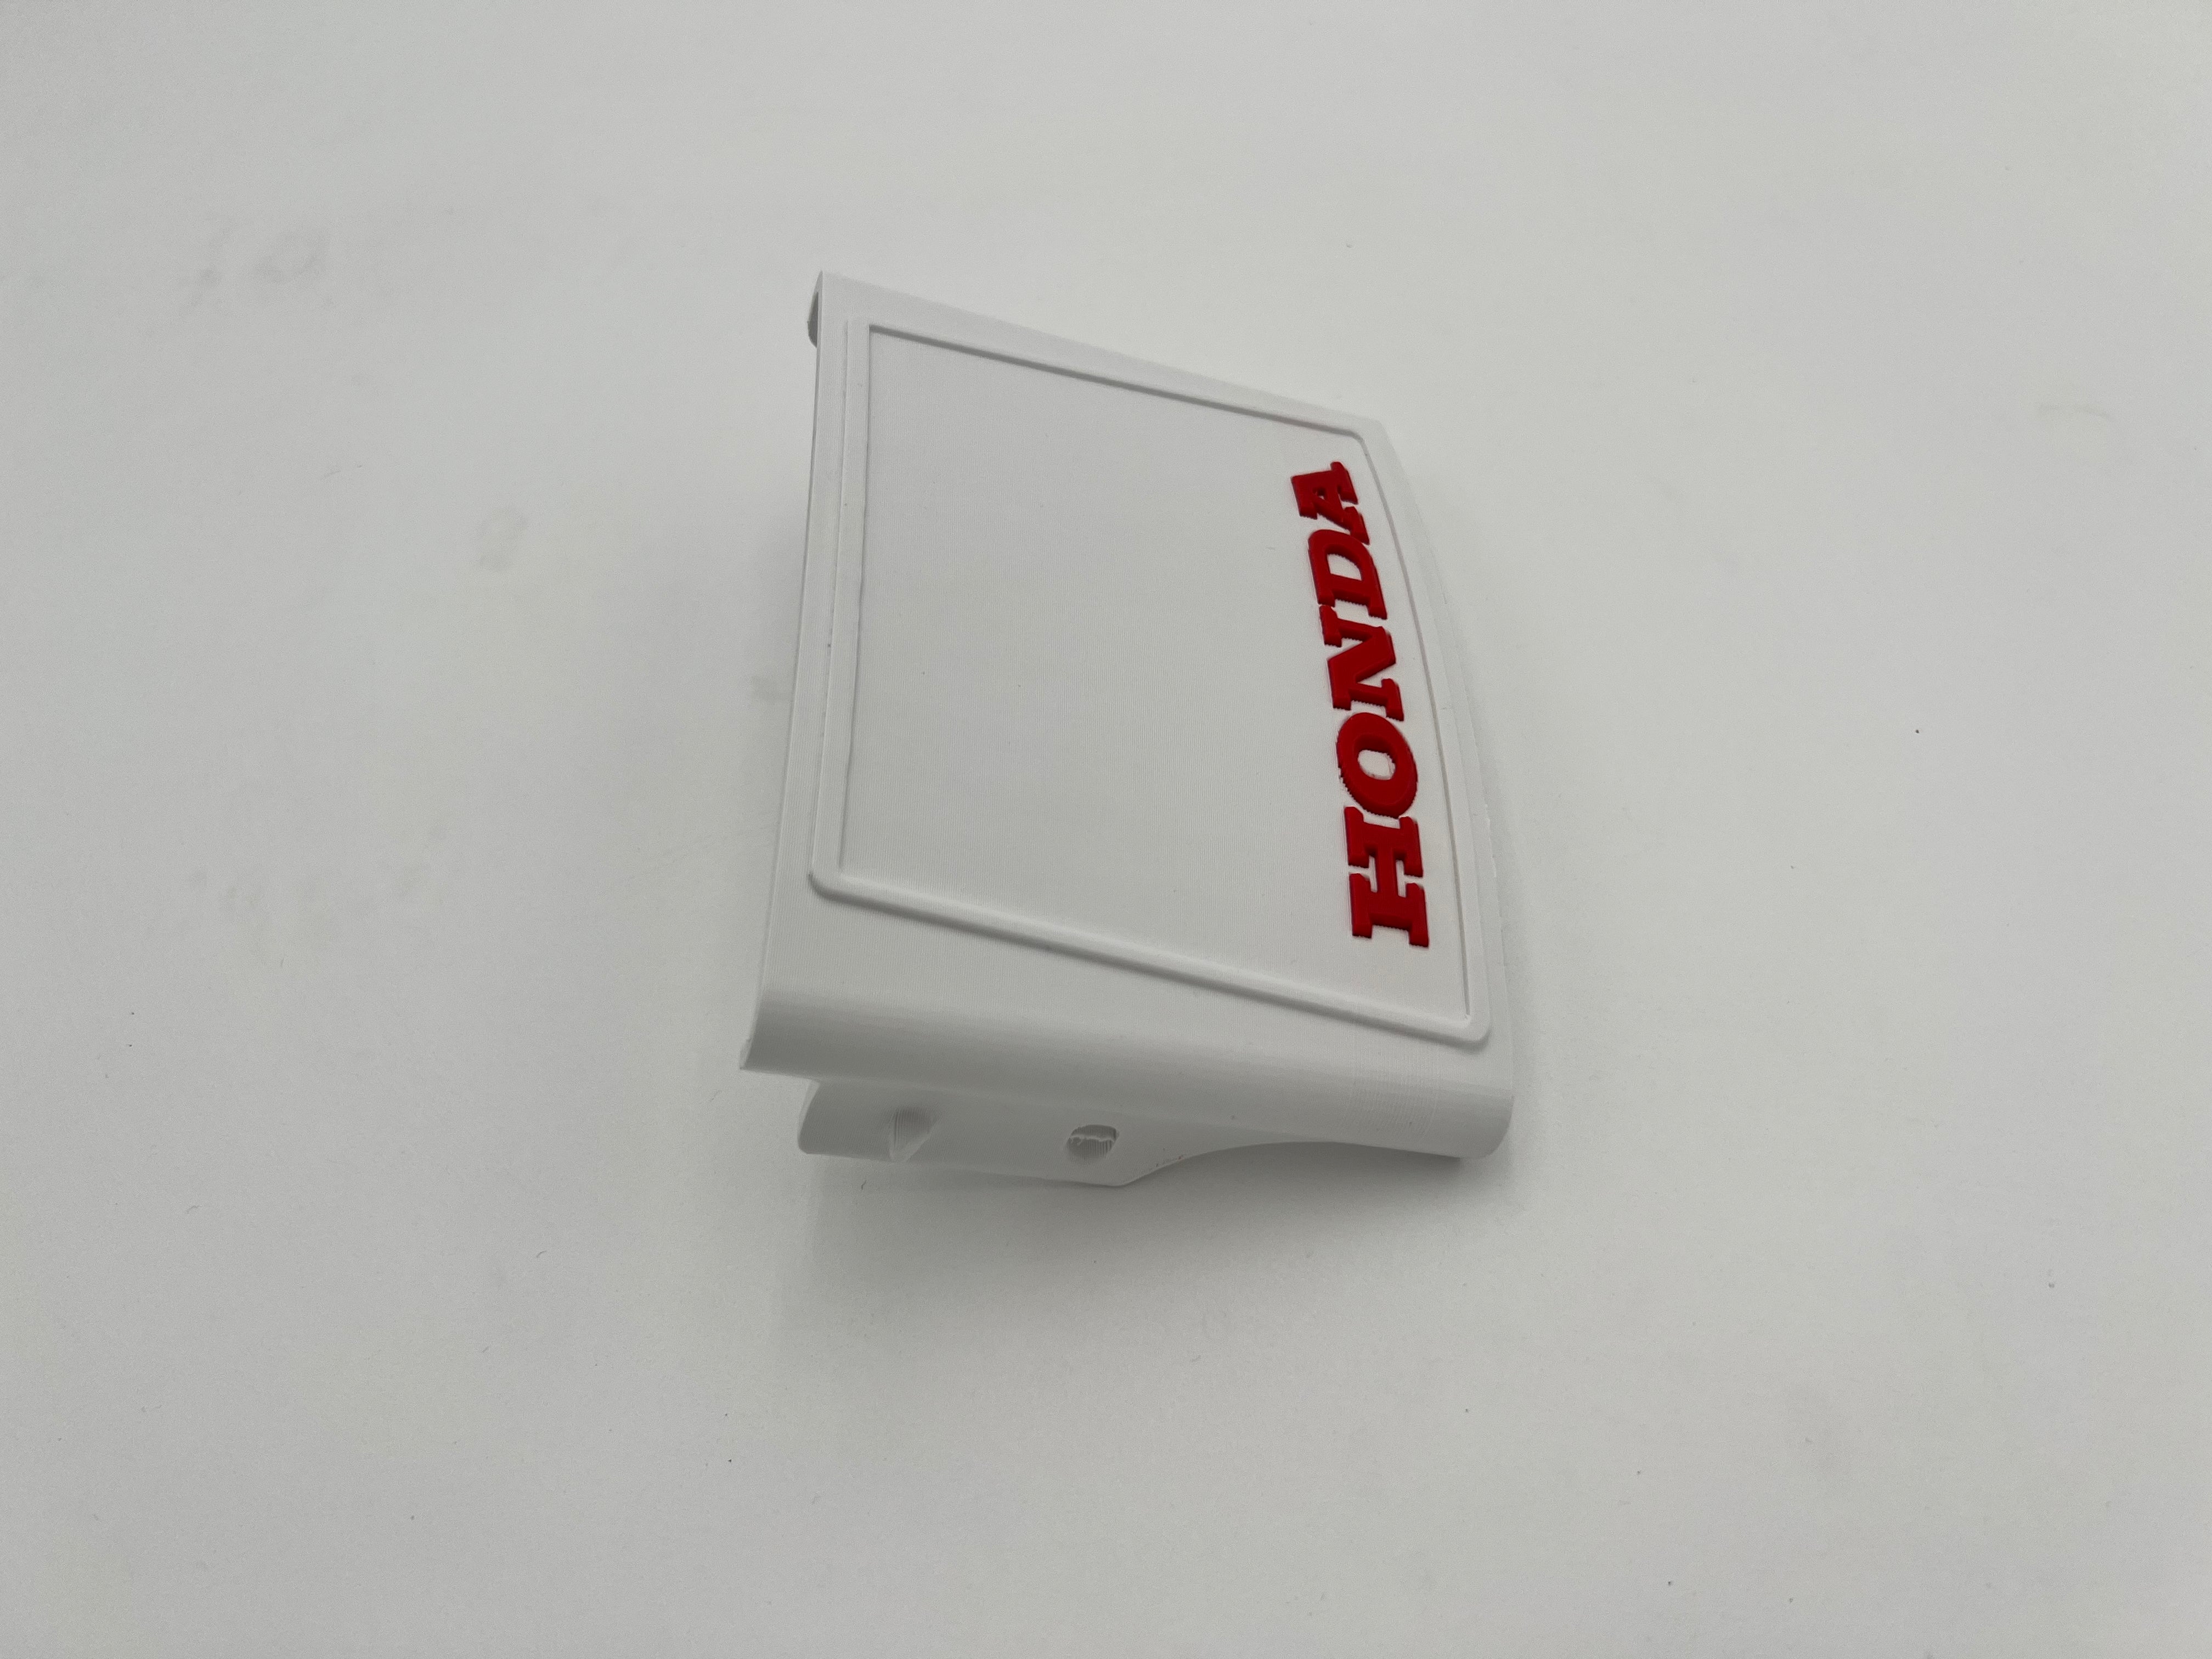 1978-1985 Honda ATC 70 3D Printed White and Red Front Number Plate